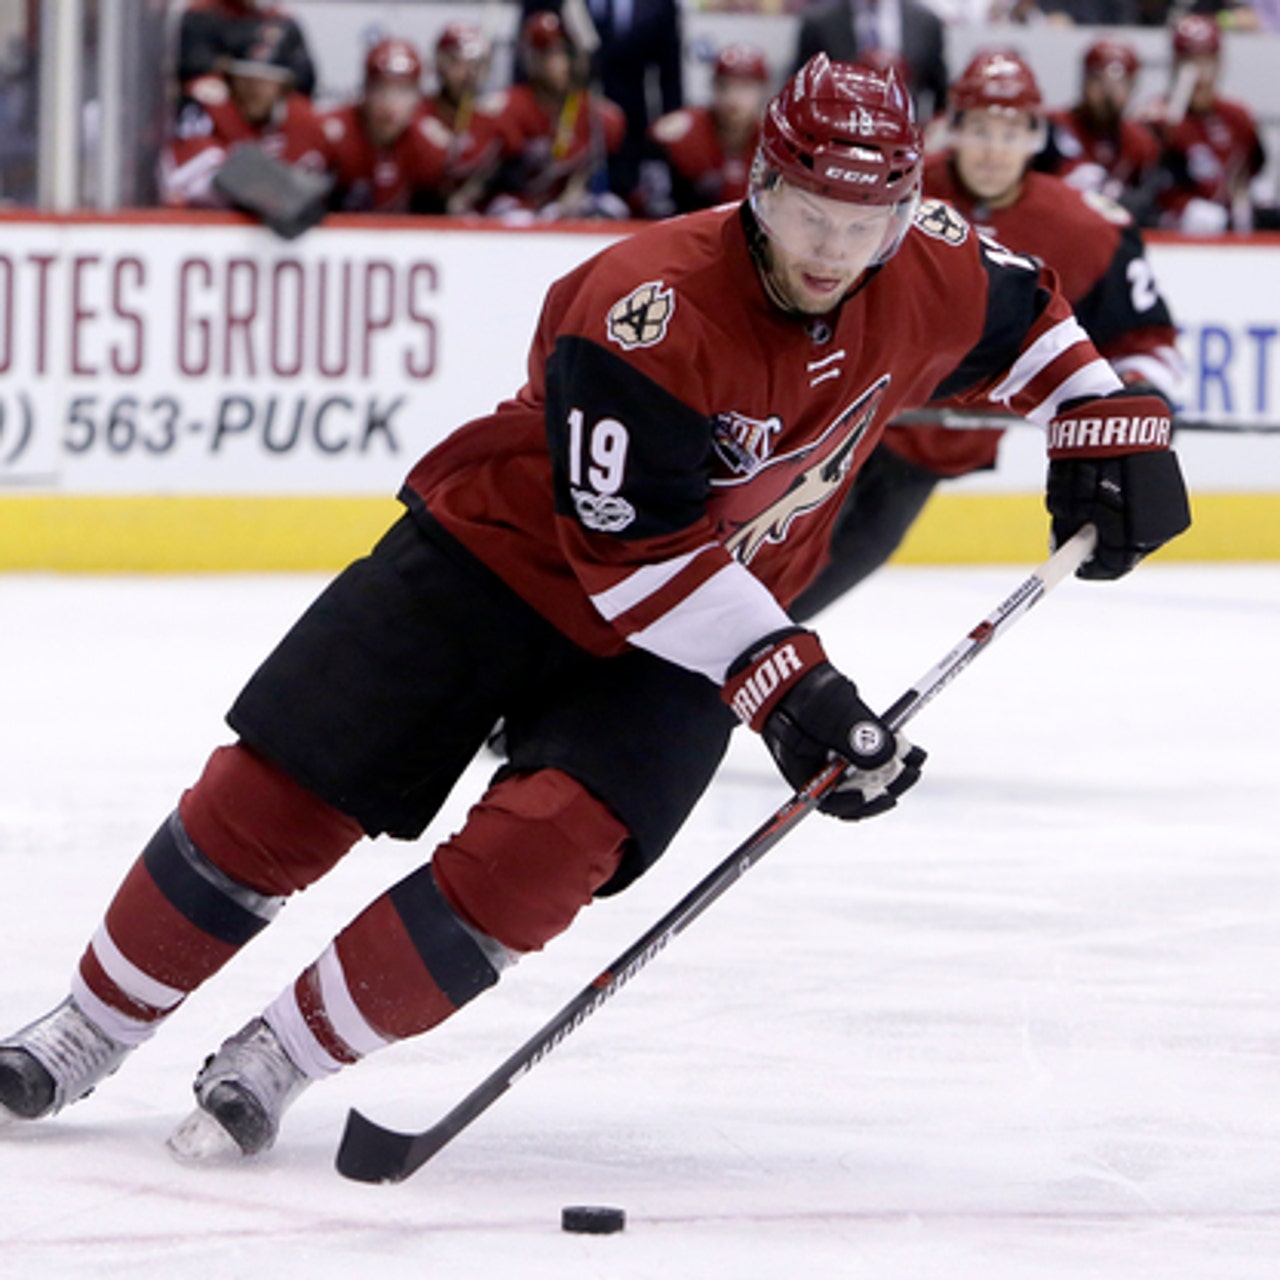 Shane Doan, Arizona Coyotes captain, retires after 21 years in NHL